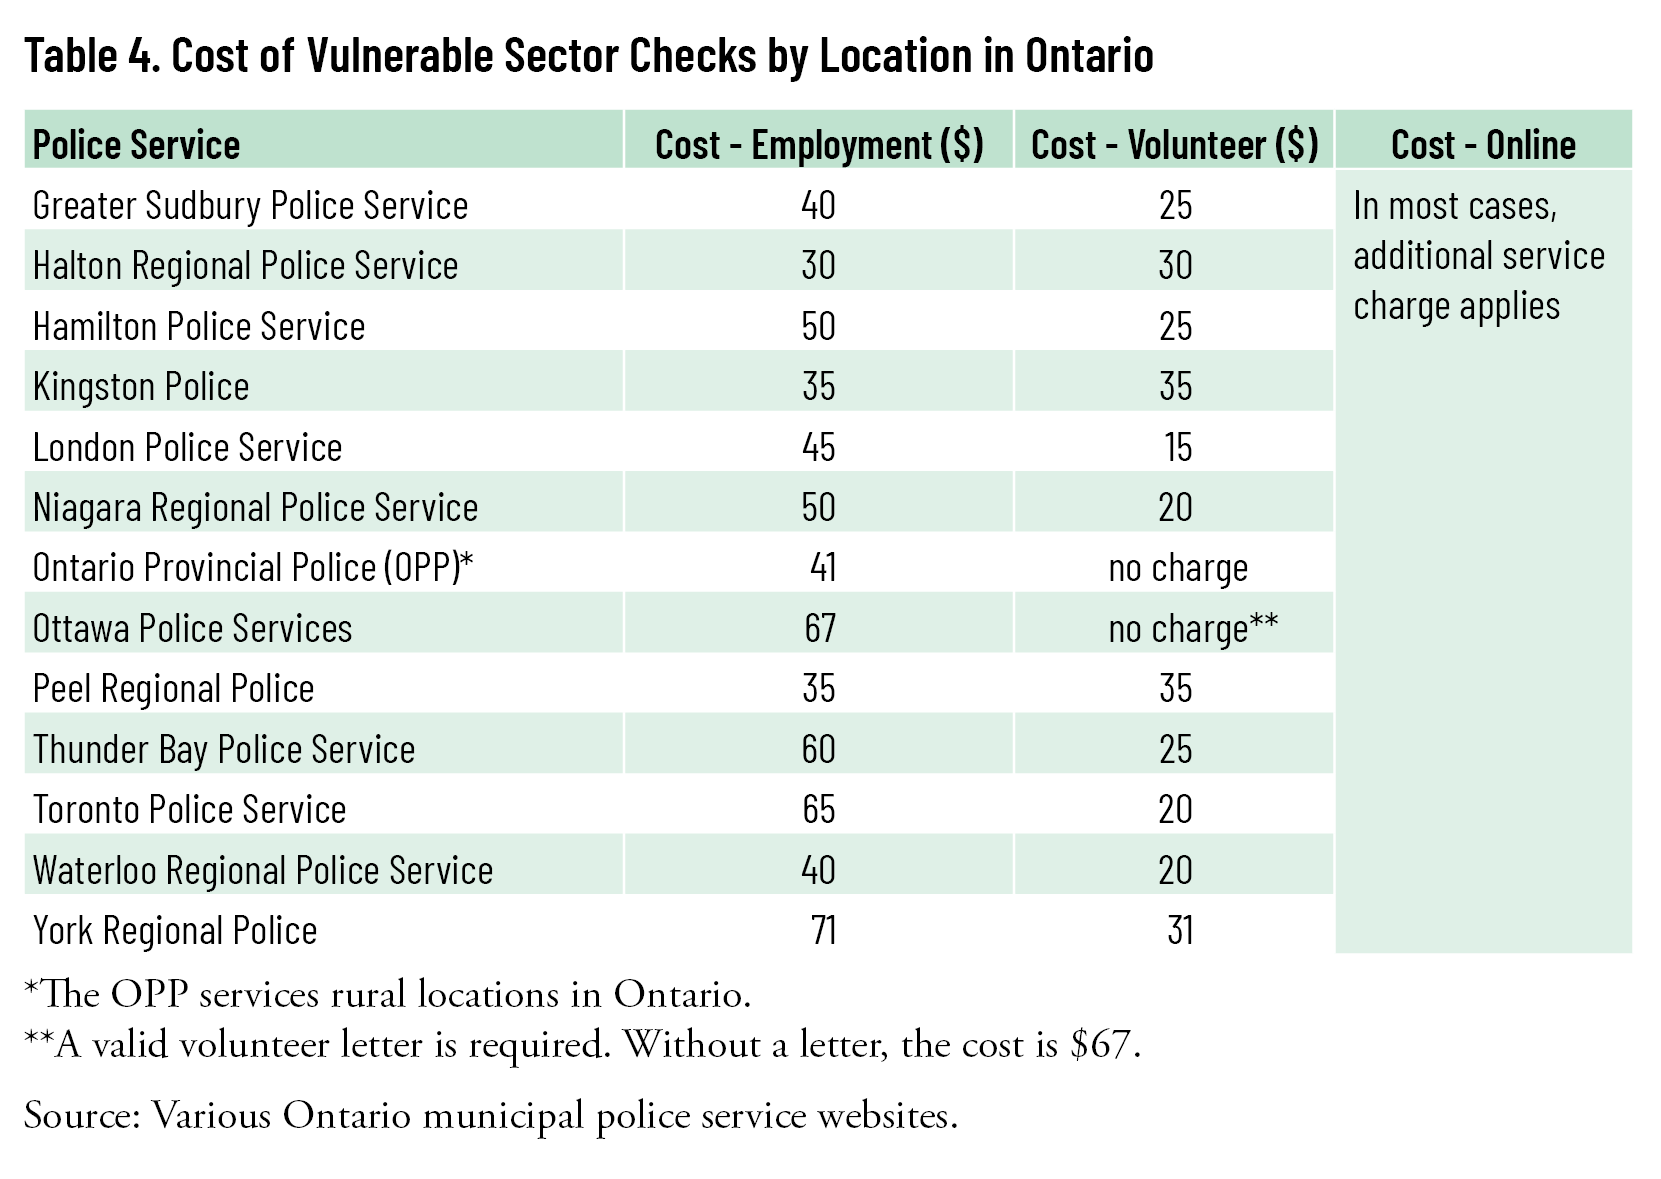 Table 4: Cost of Vulnerable Sector Checks by Location in Ontario